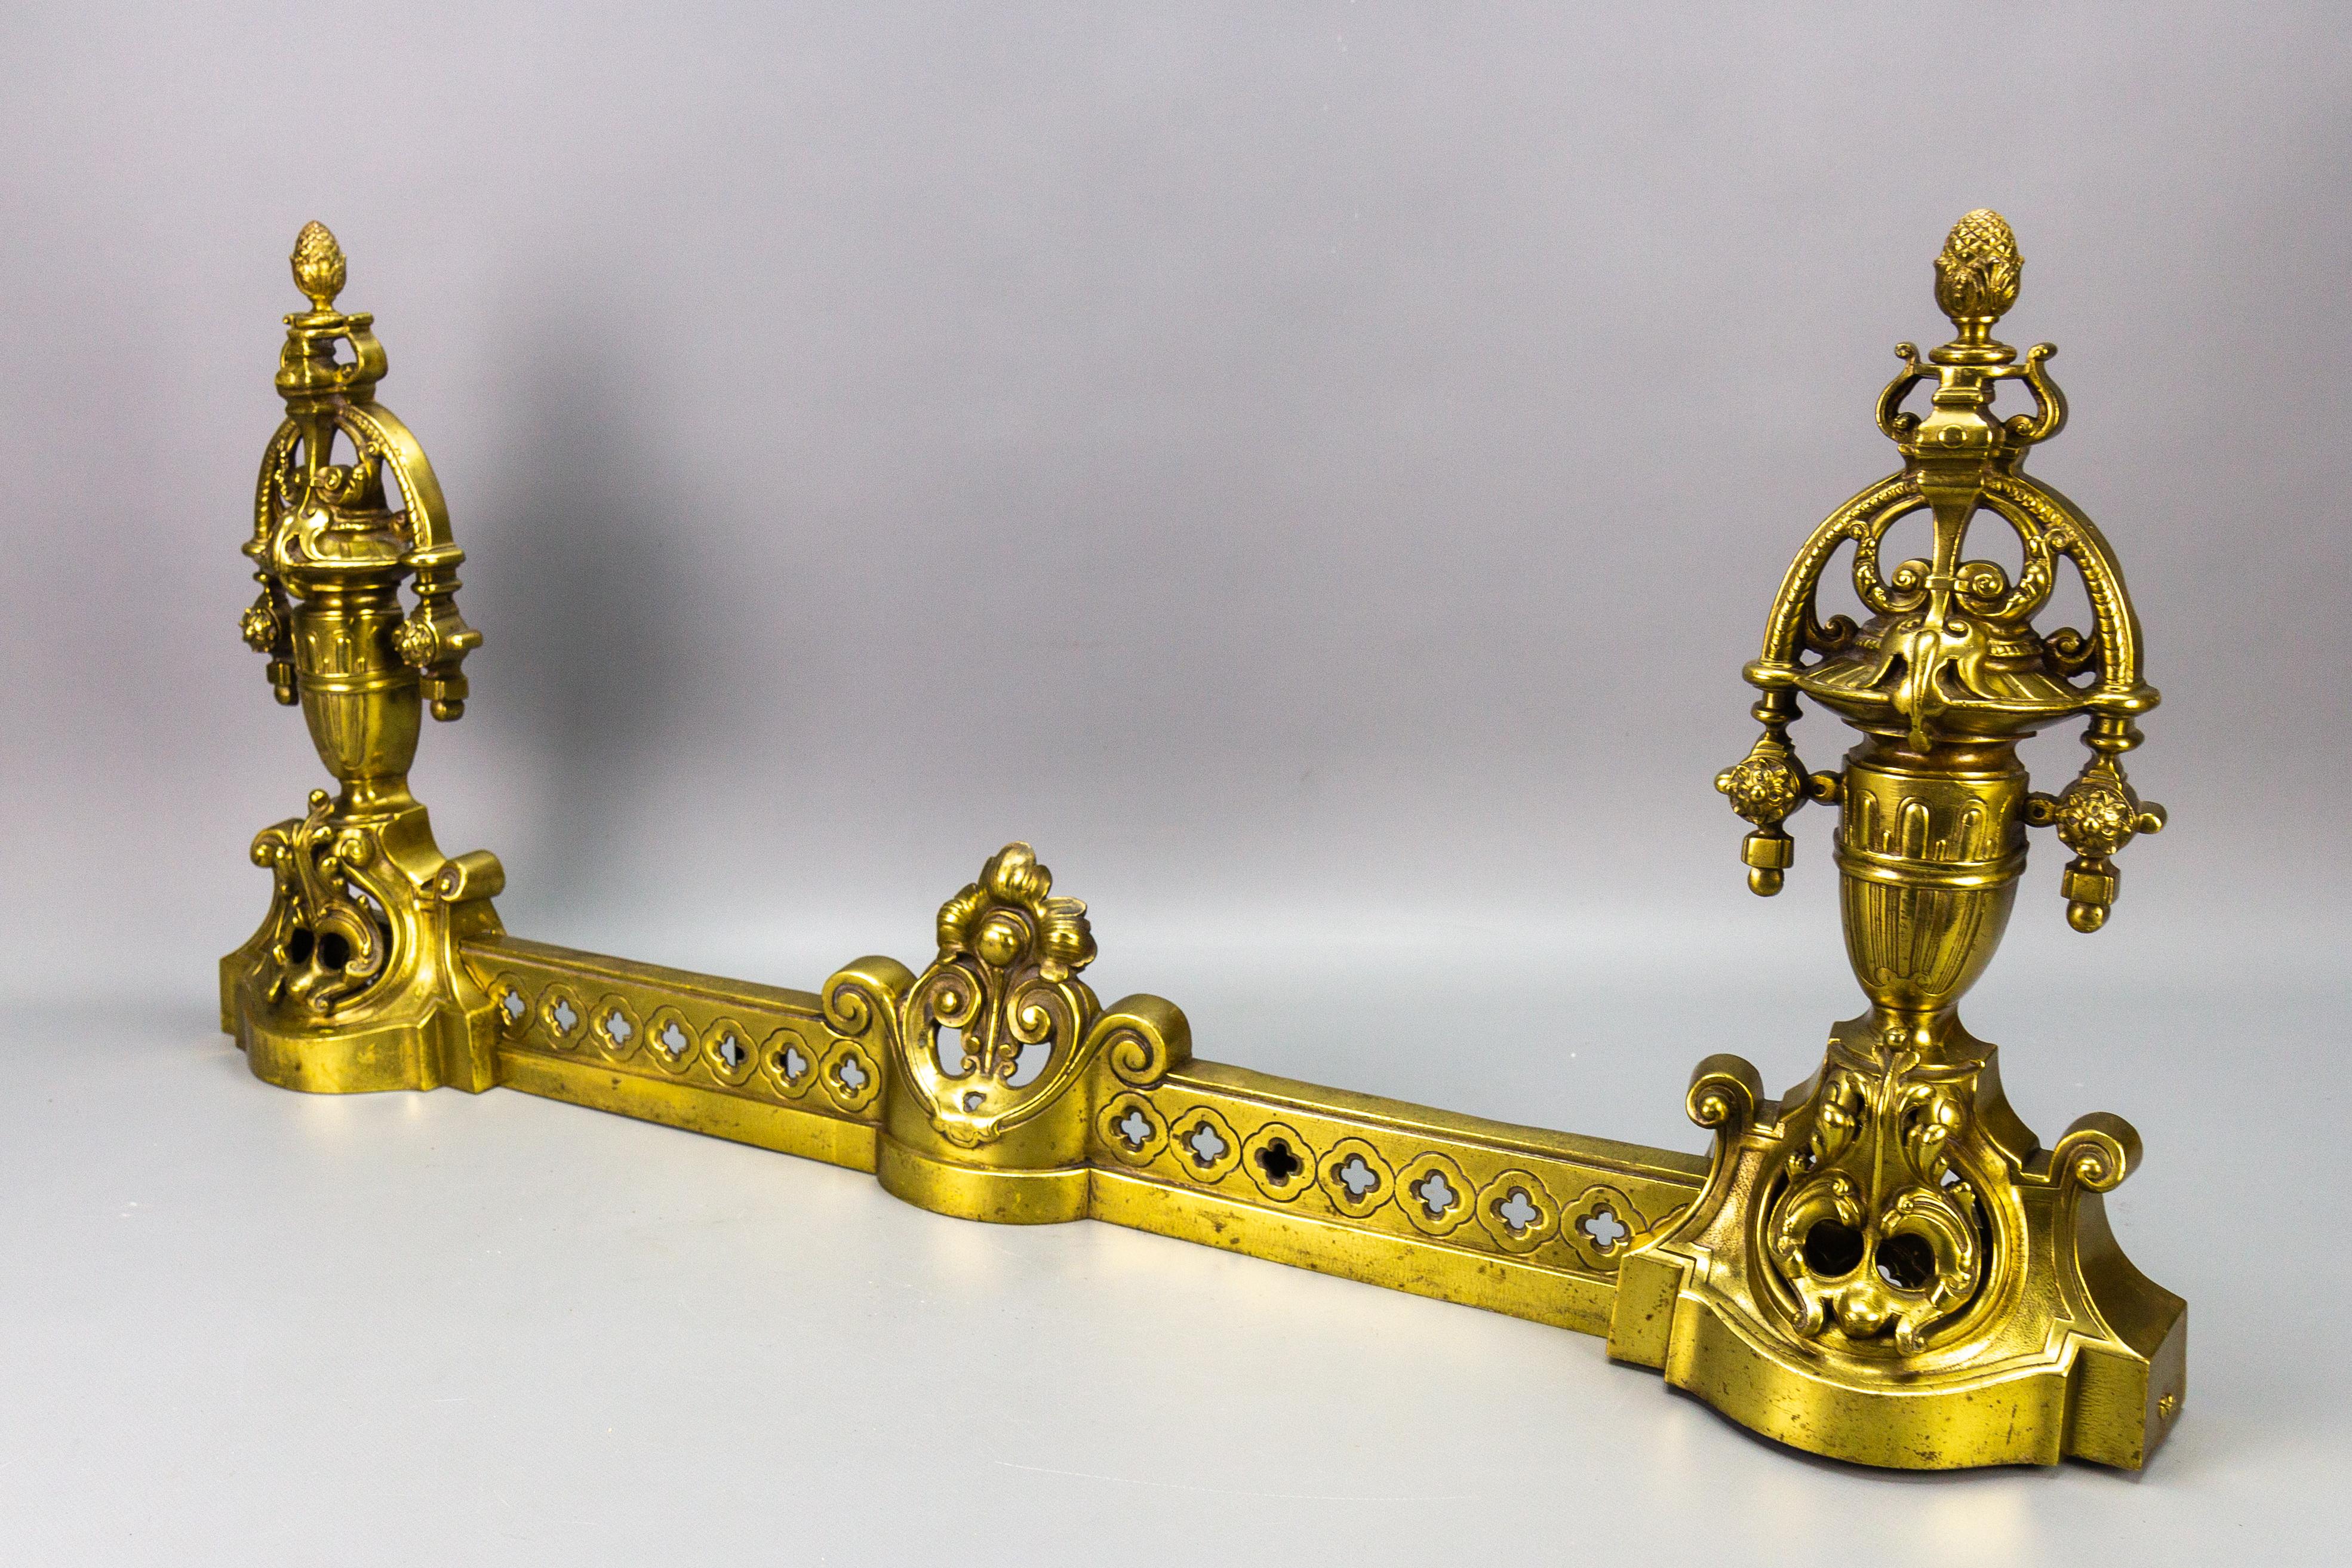 French Neoclassical style bronze fireplace fender set from circa 1920, sold as a set of 3.
This impressive French Neoclassical style bronze fender set is richly ornate with foliate accents, urns, and acorn finials.
In good antique condition, with